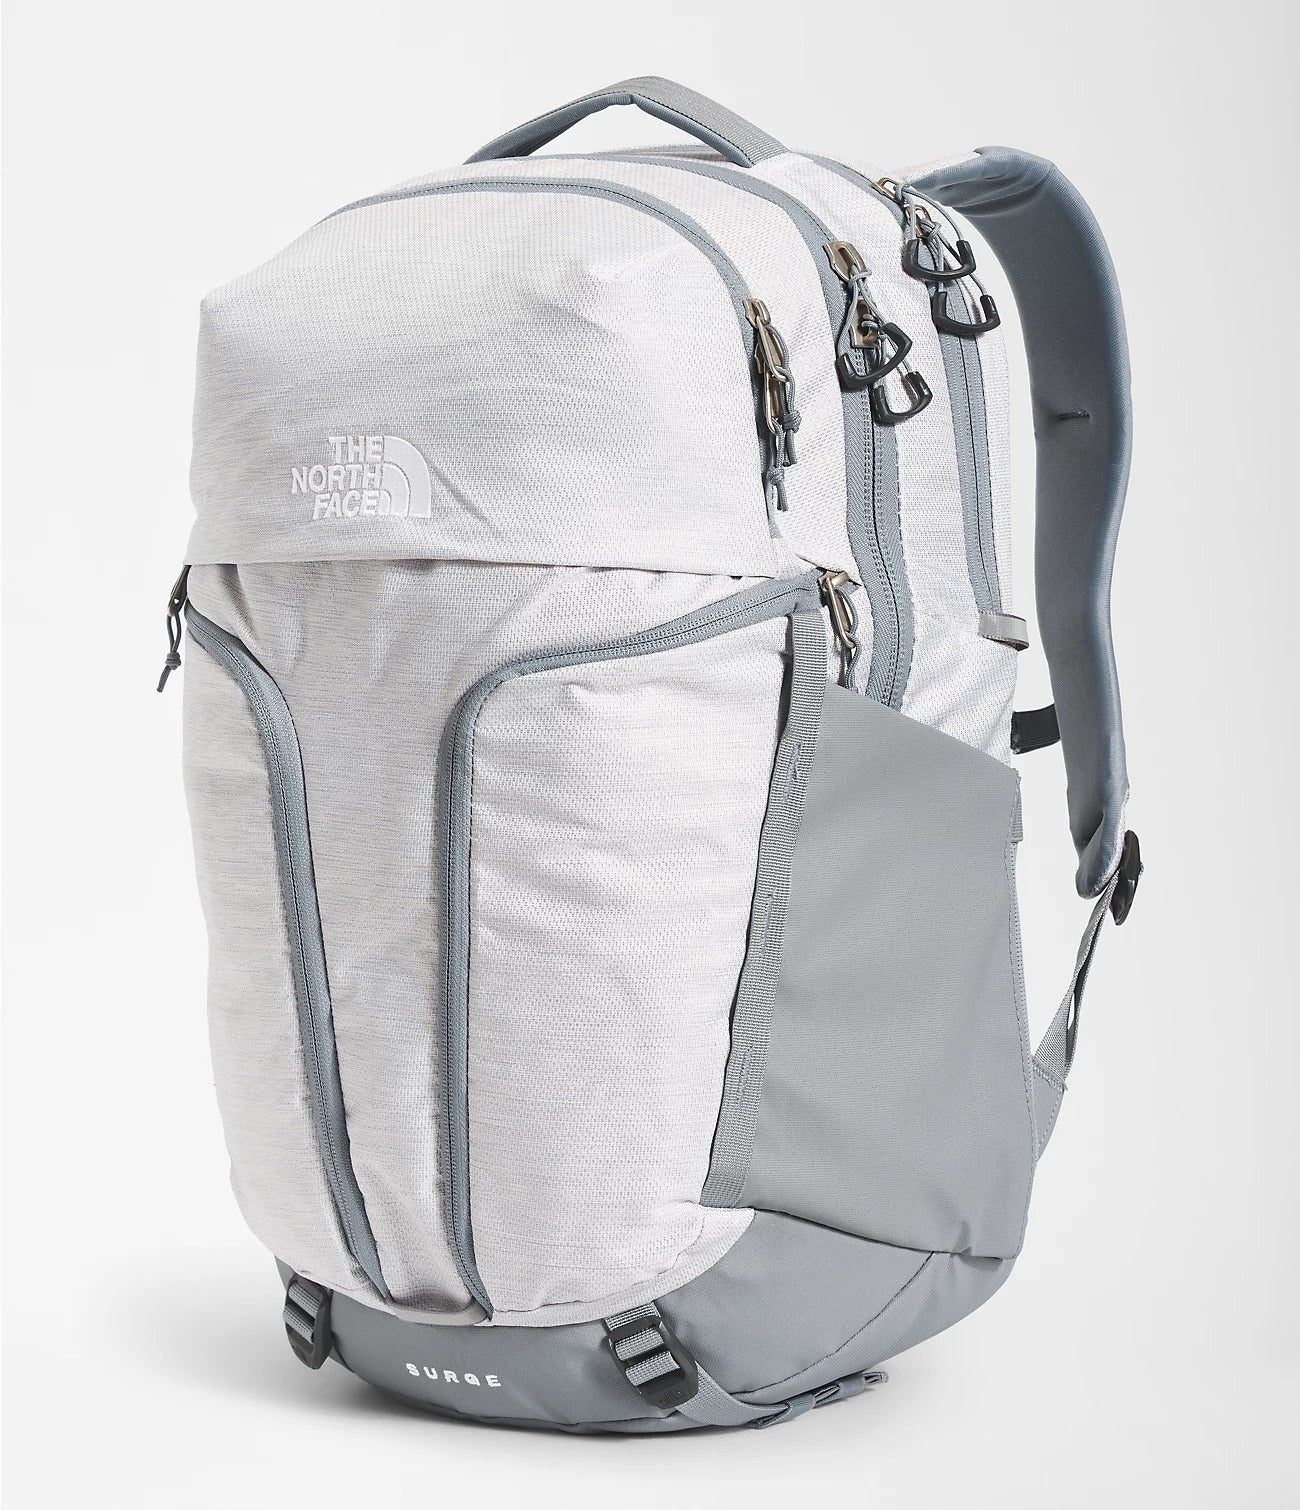 The North Face Women’s Surge Backpack